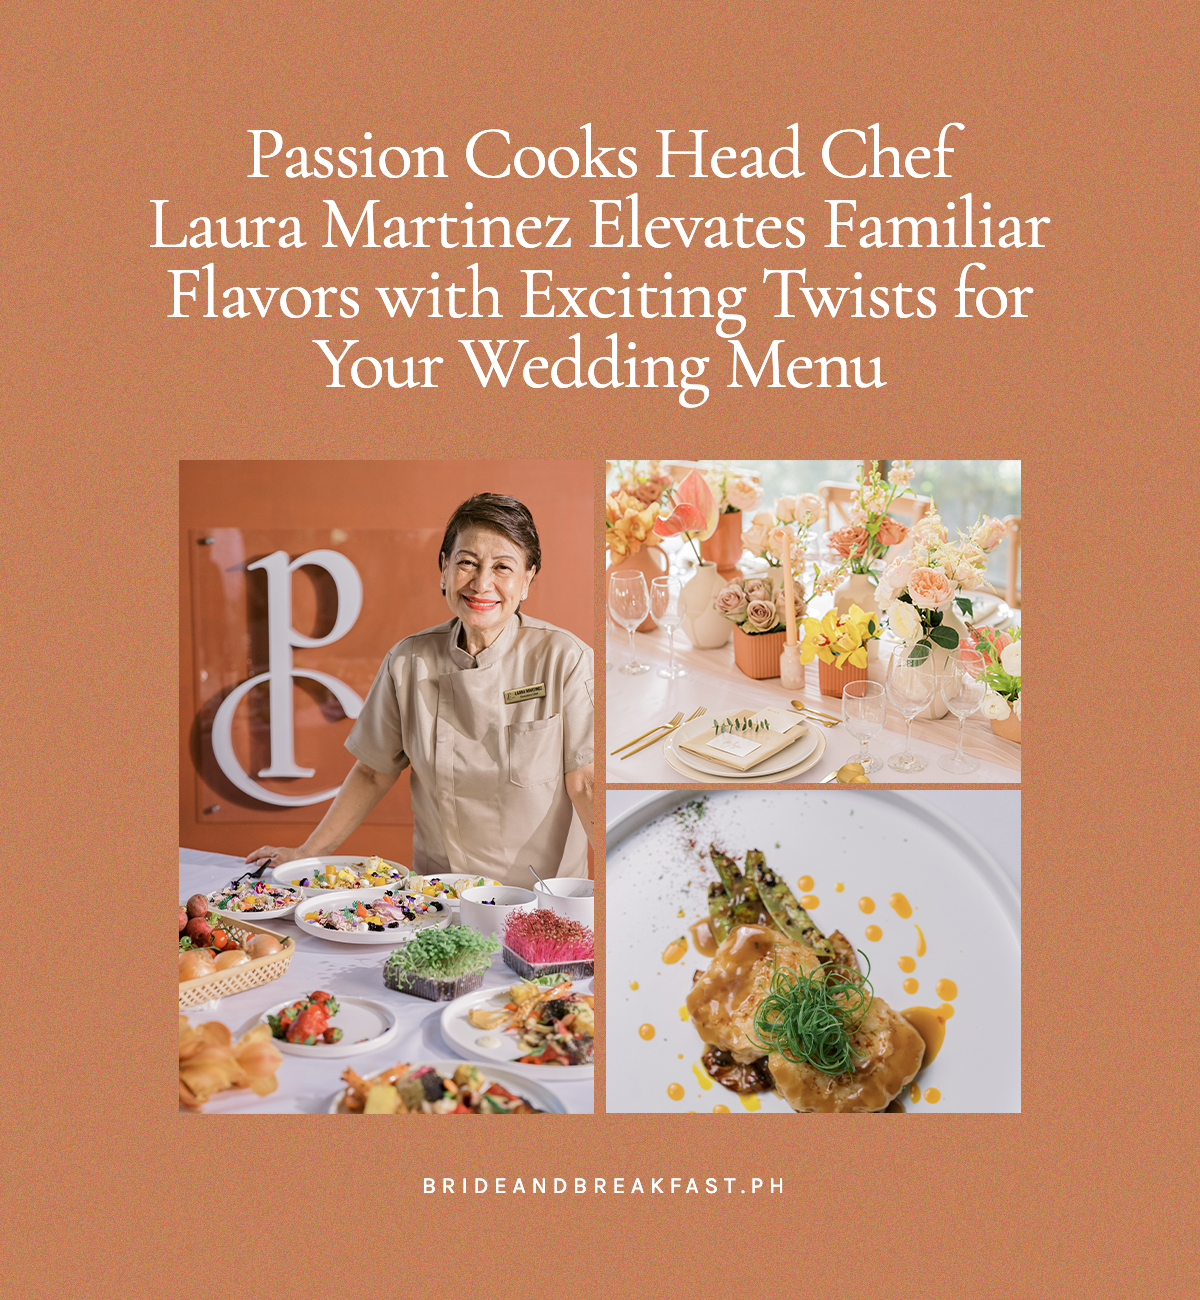 Passion Cooks Head Chef Laura Martinez Elevates Familiar Flavors with Exciting Twists for Your Wedding Menu